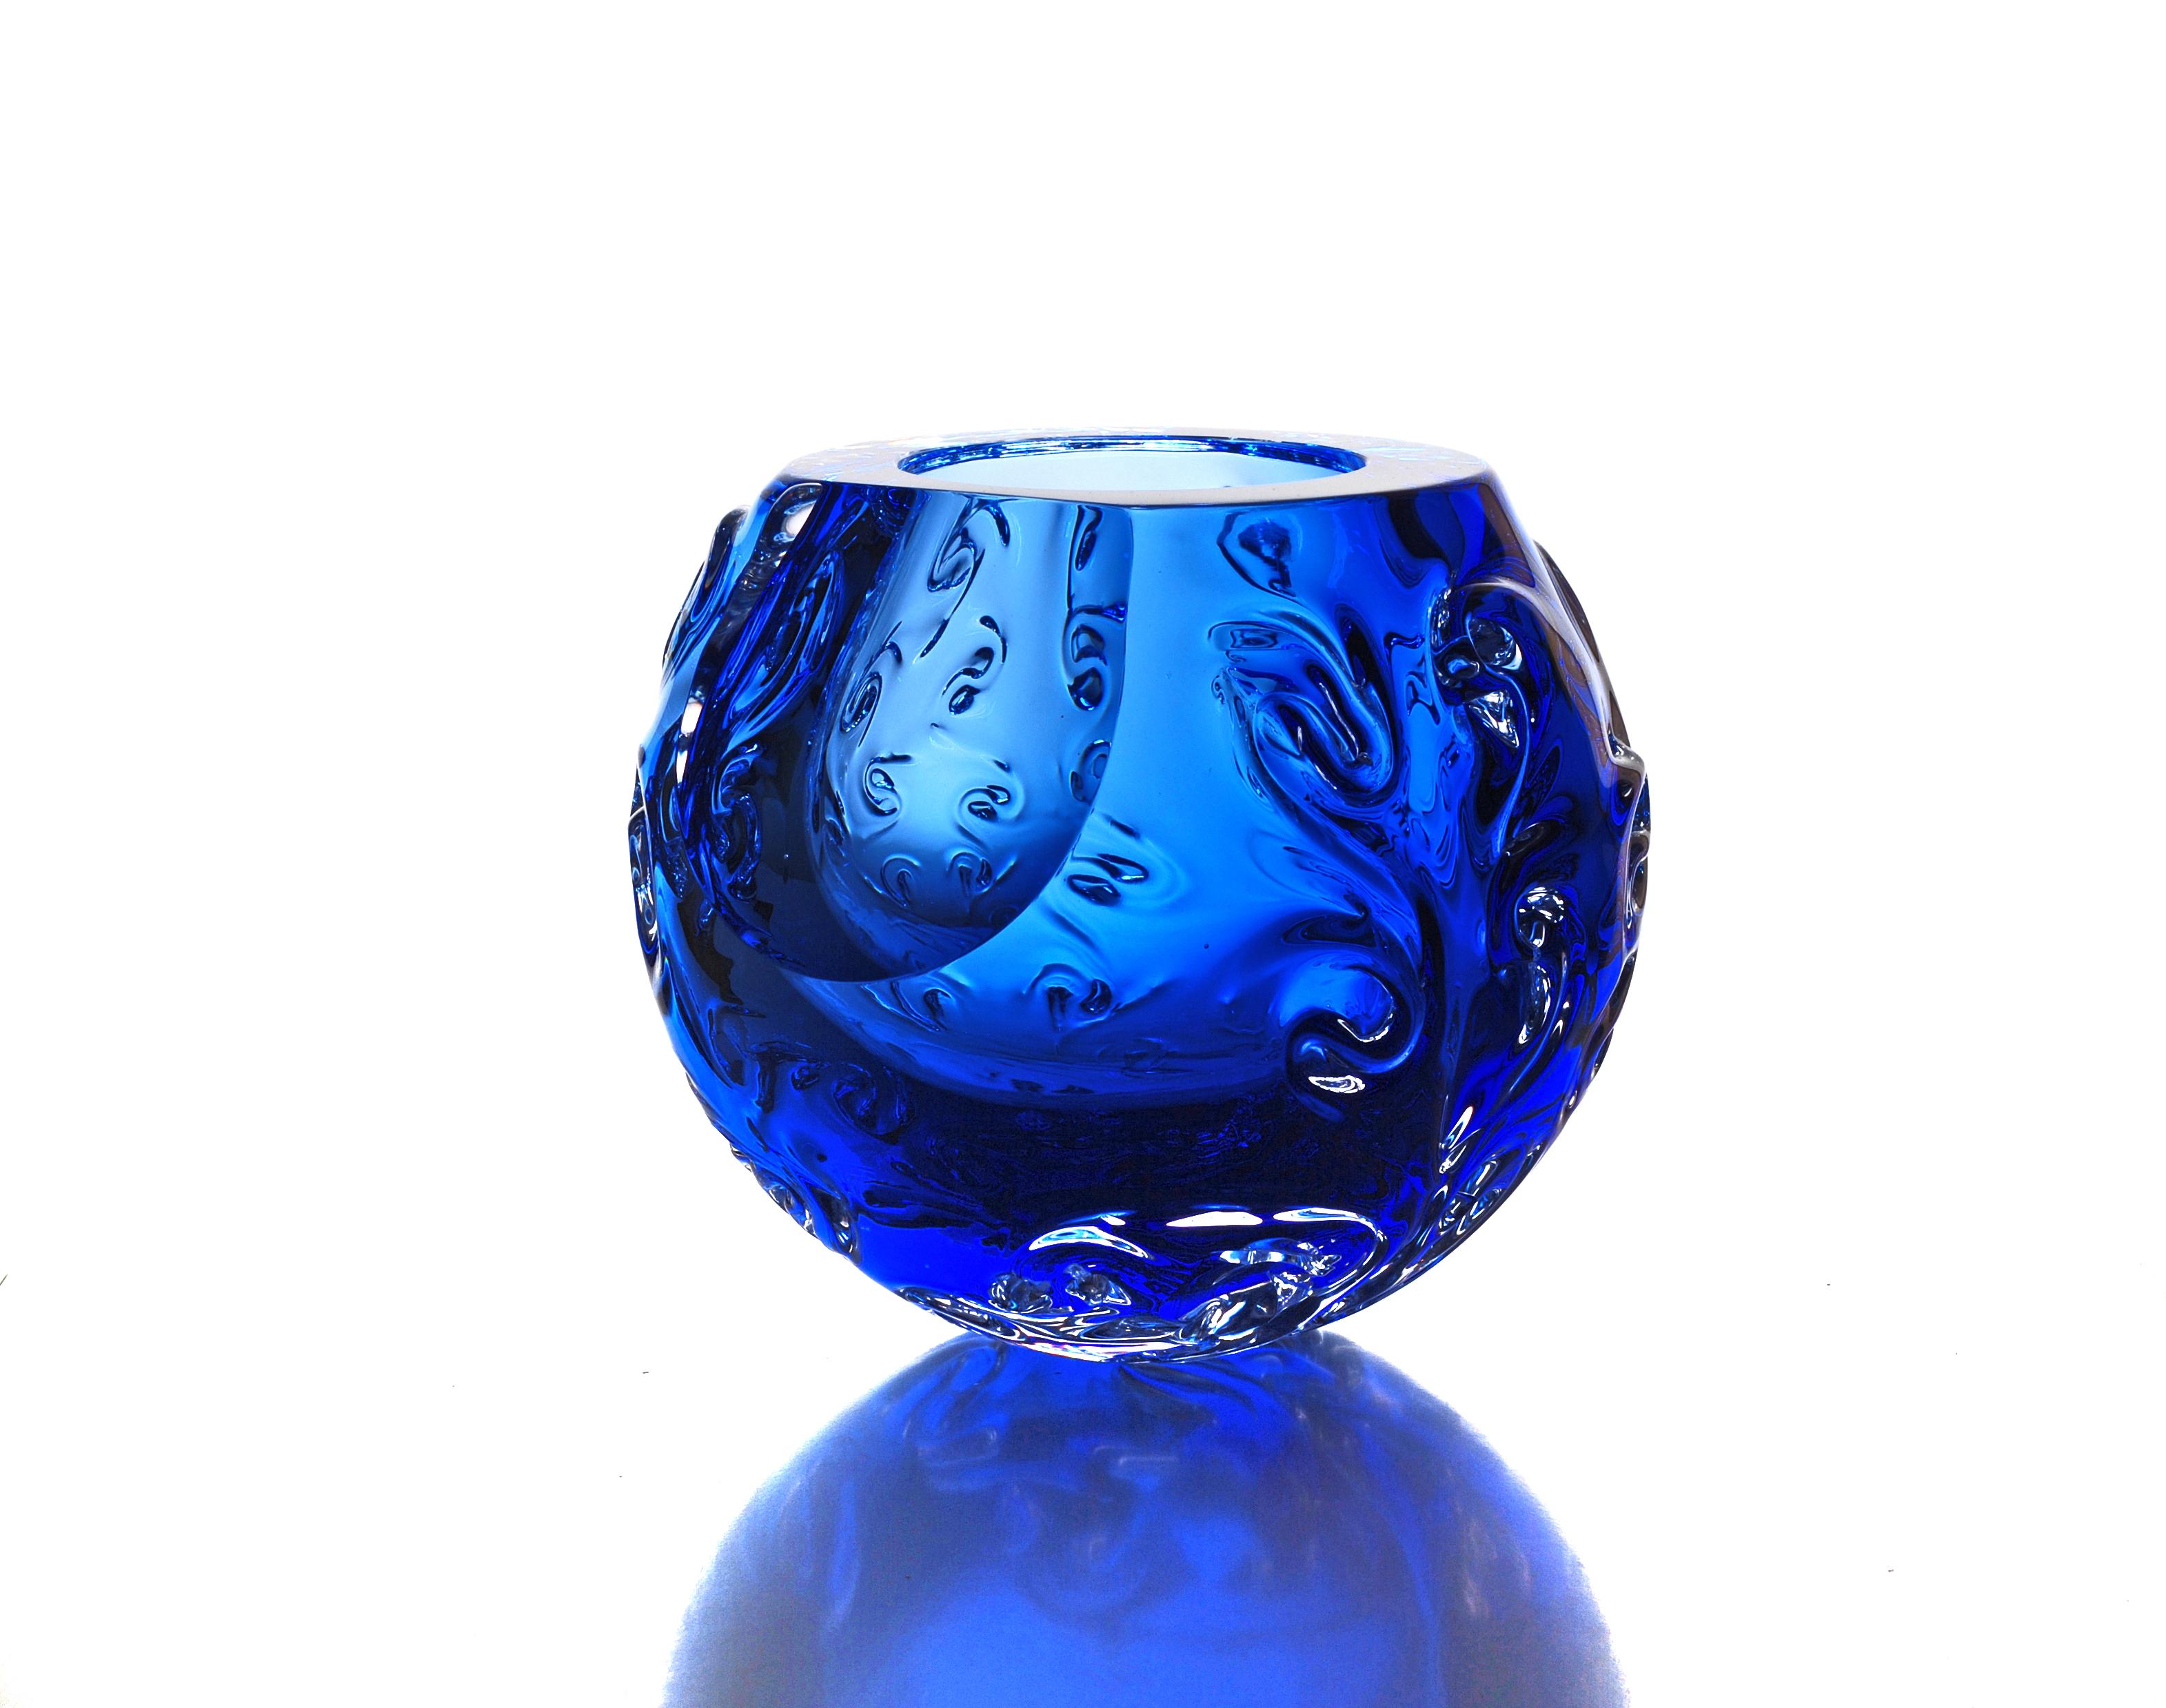 Structural bowl with iconic organic design. Vessel made of solid blue hand sculptured glass. It represents planet - asteroid, fragment of cosmic matter. Bowl is created by spontaneous shaping of hot glass mass without the use of any mold. Big faset